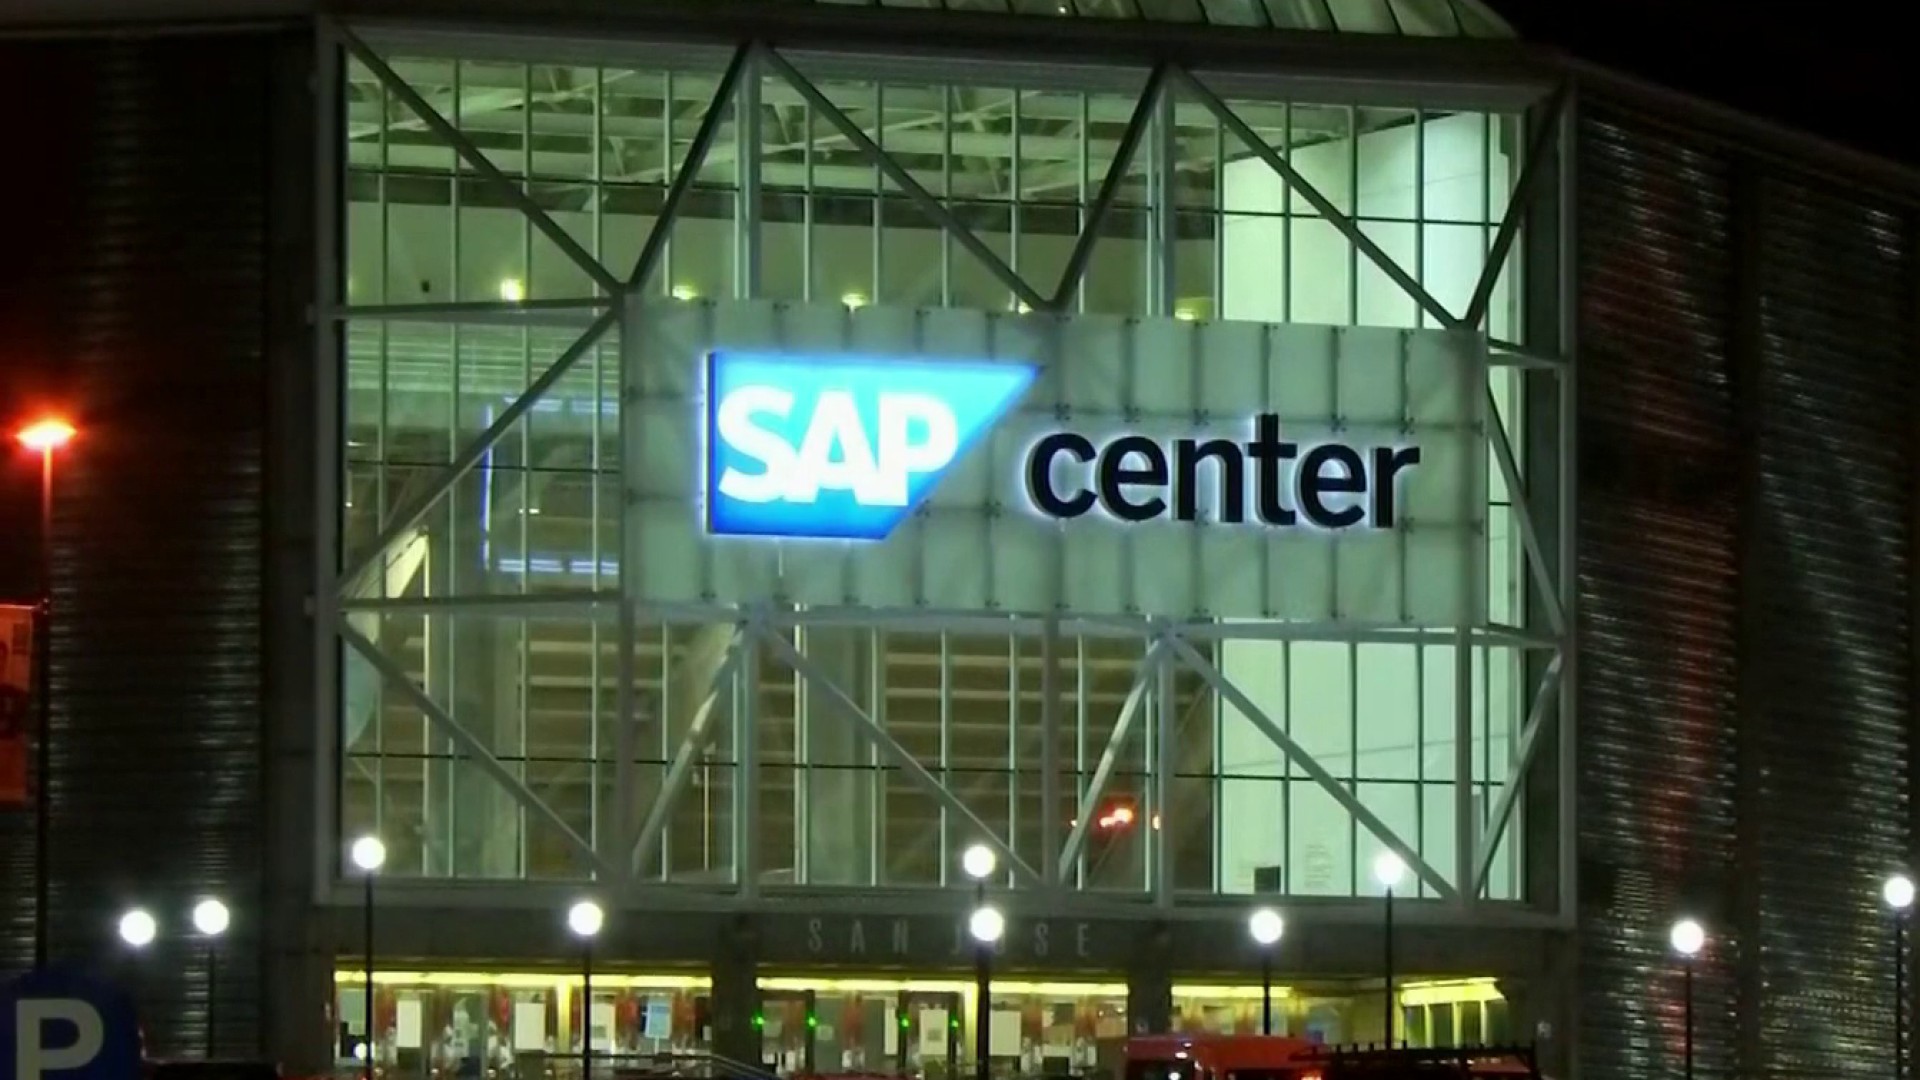 VHN Daily Wrap: Bomb Scare at SAP Center, No Harm Done, Everyone Safe